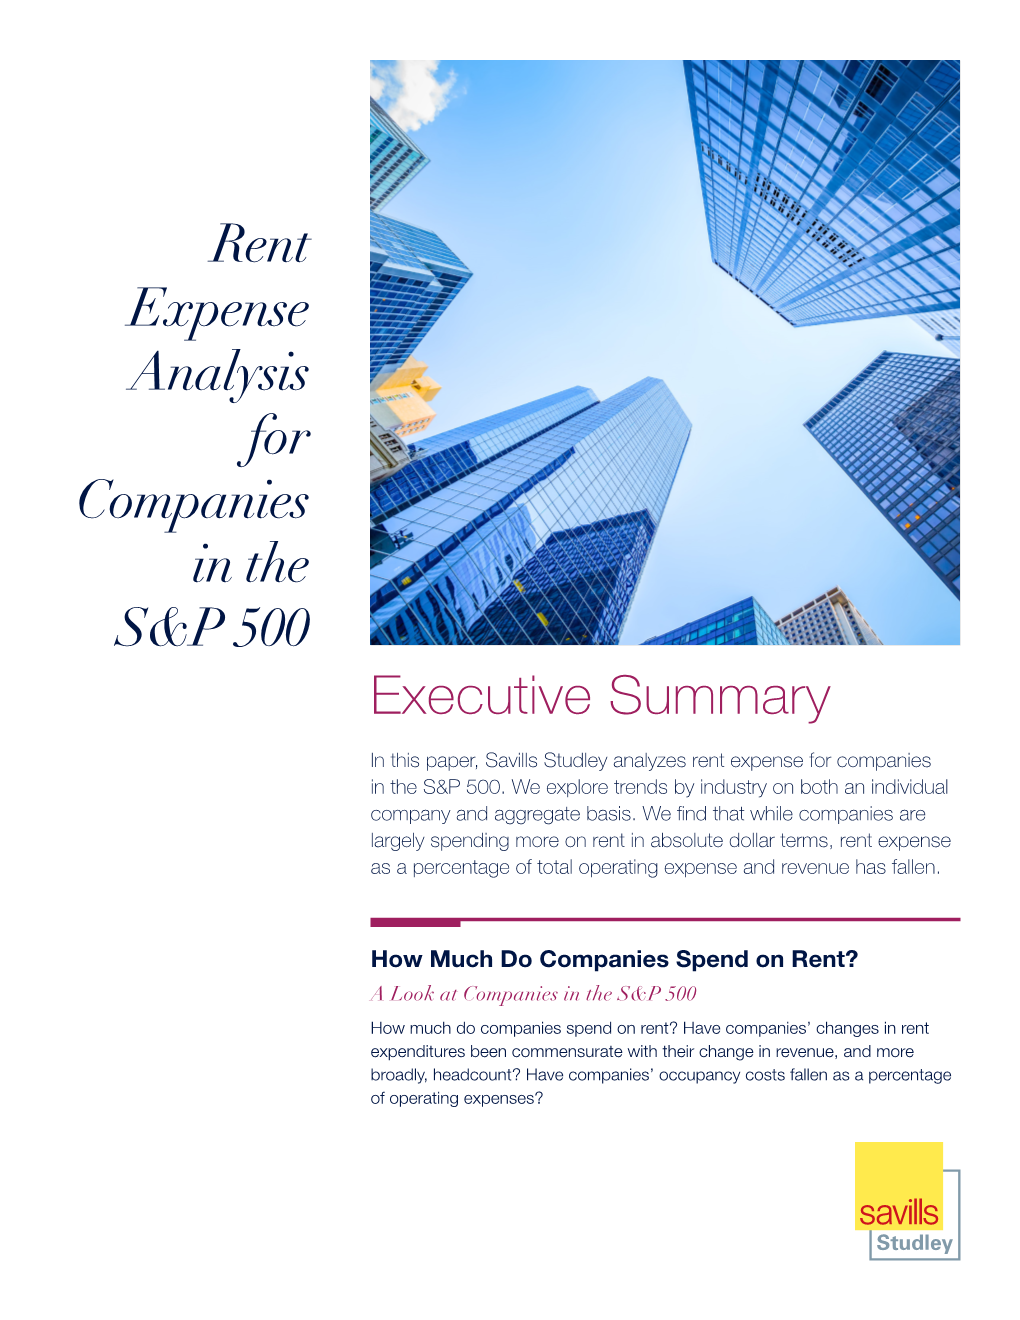 Rent Expense Analysis for Companies in the S&P